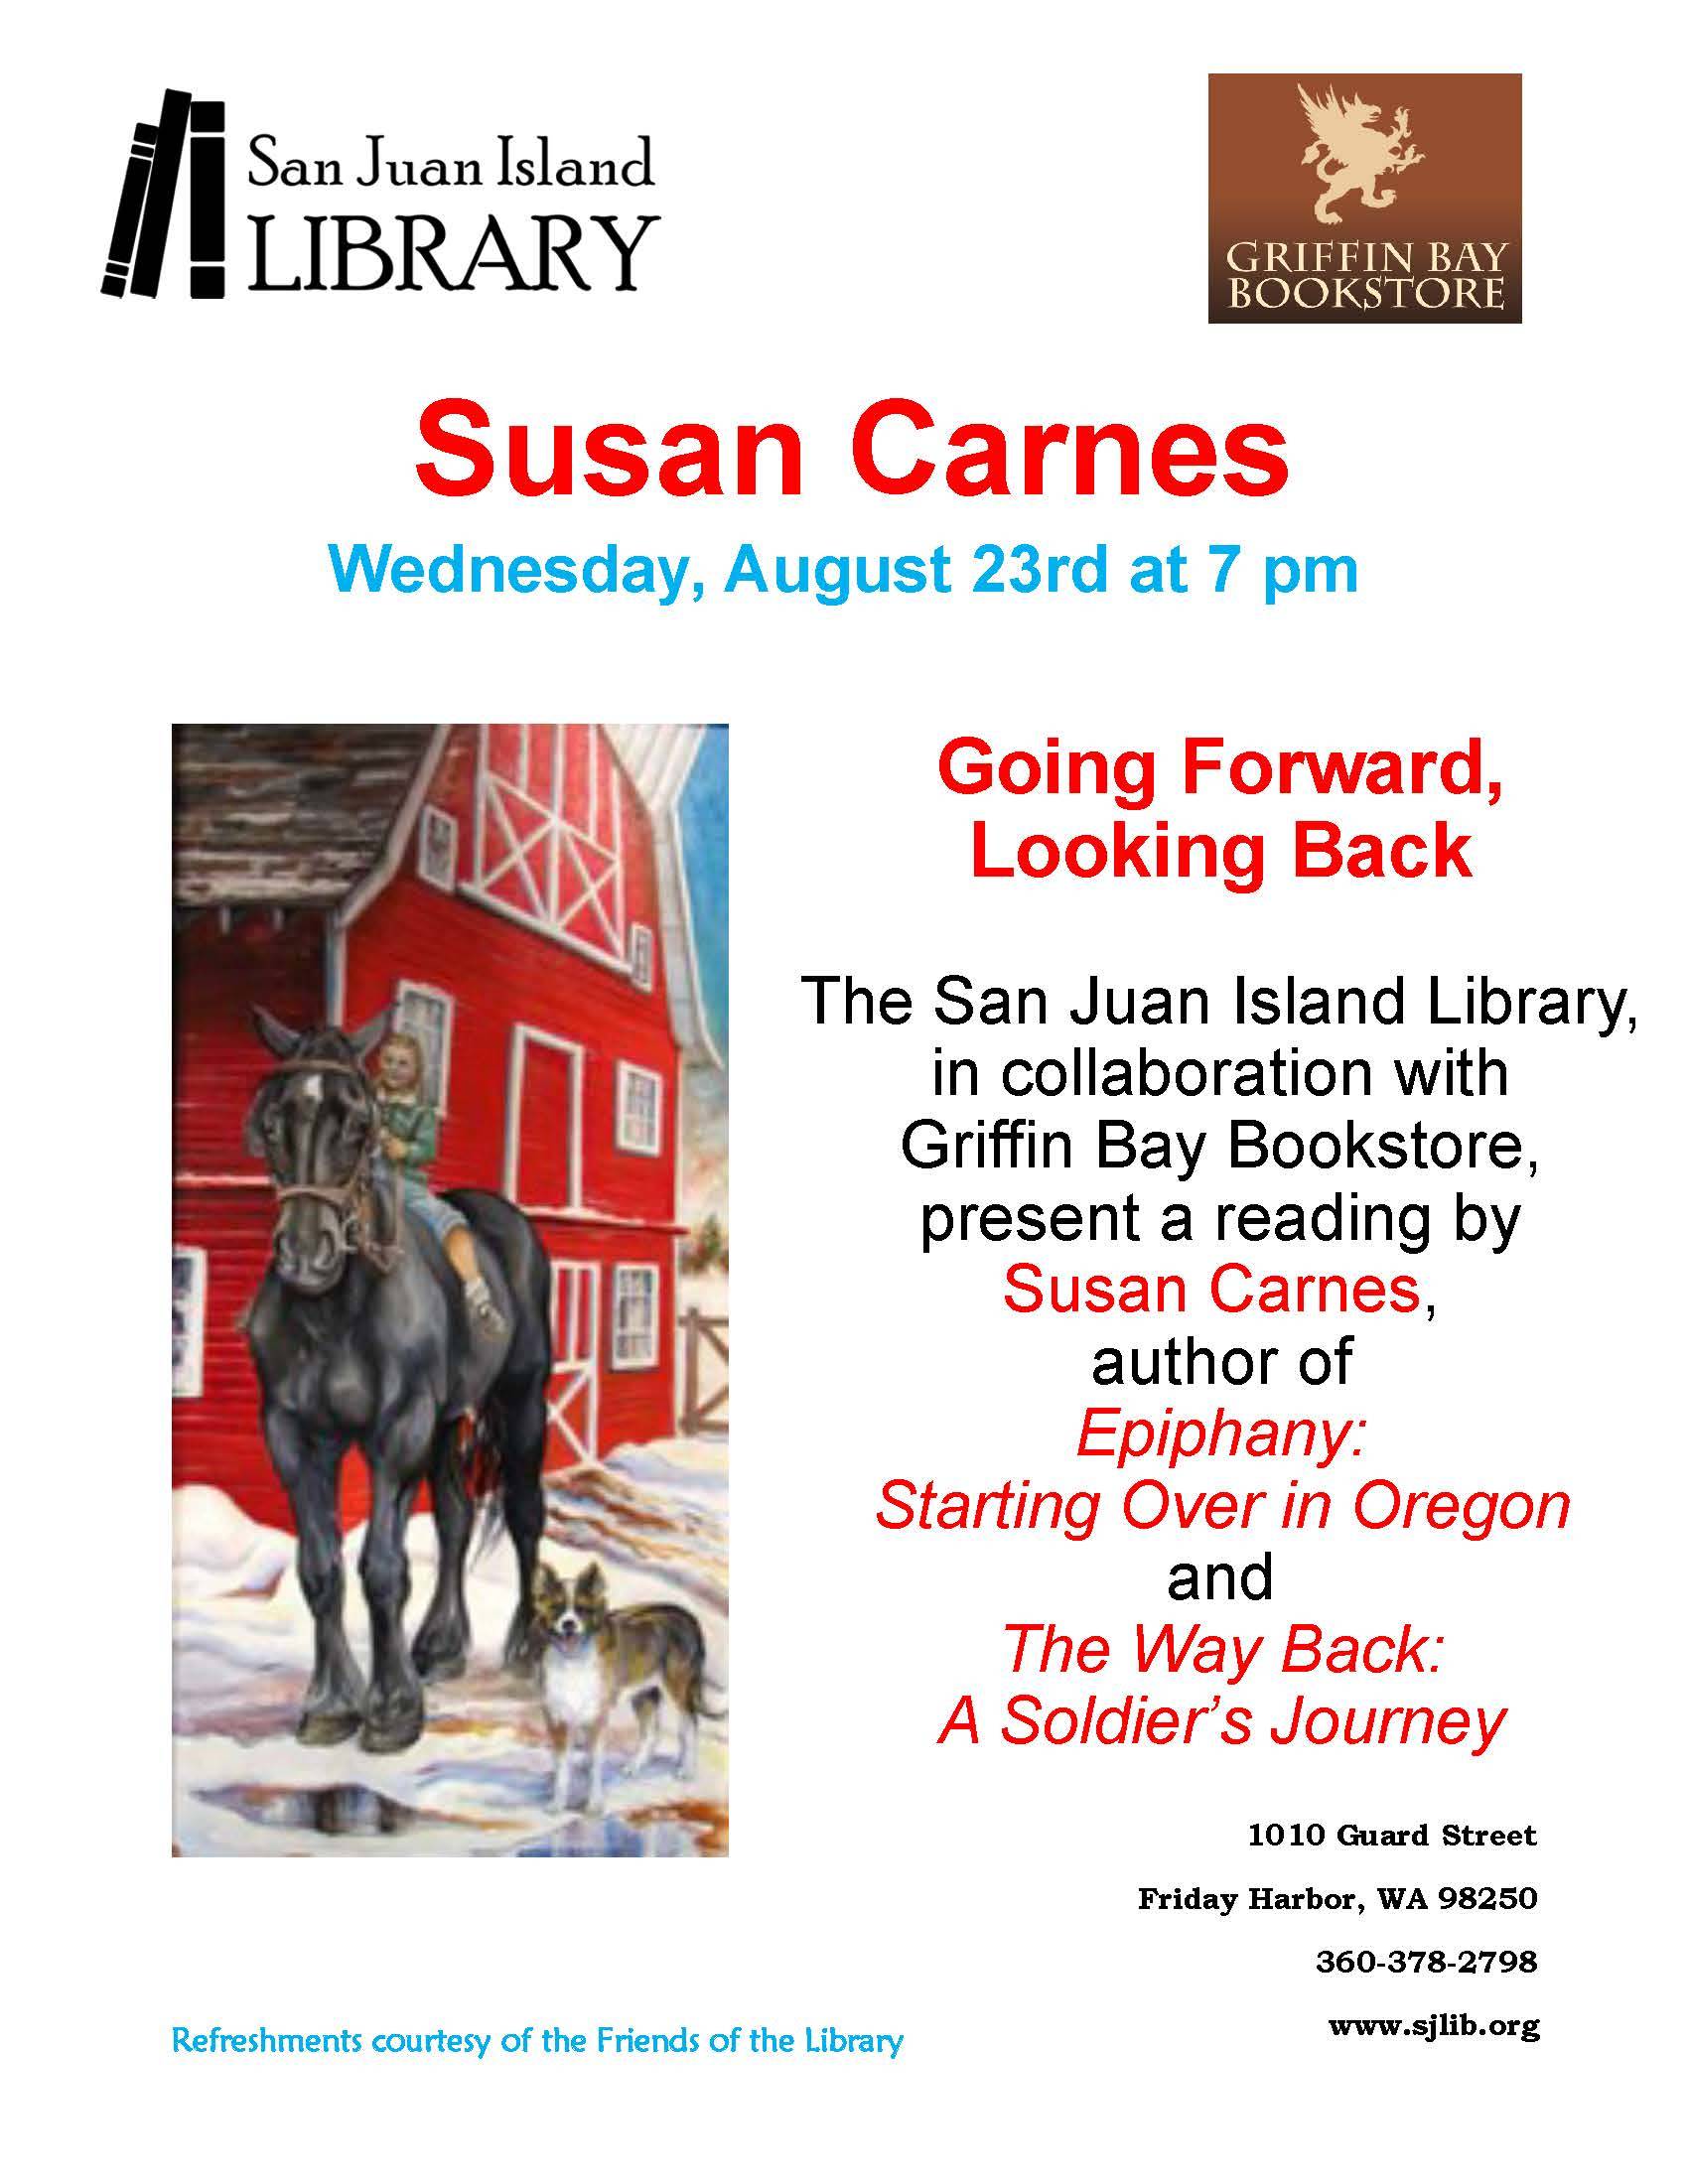 Susan Carnes reads excerpts from her two novels at San Juan Island Library